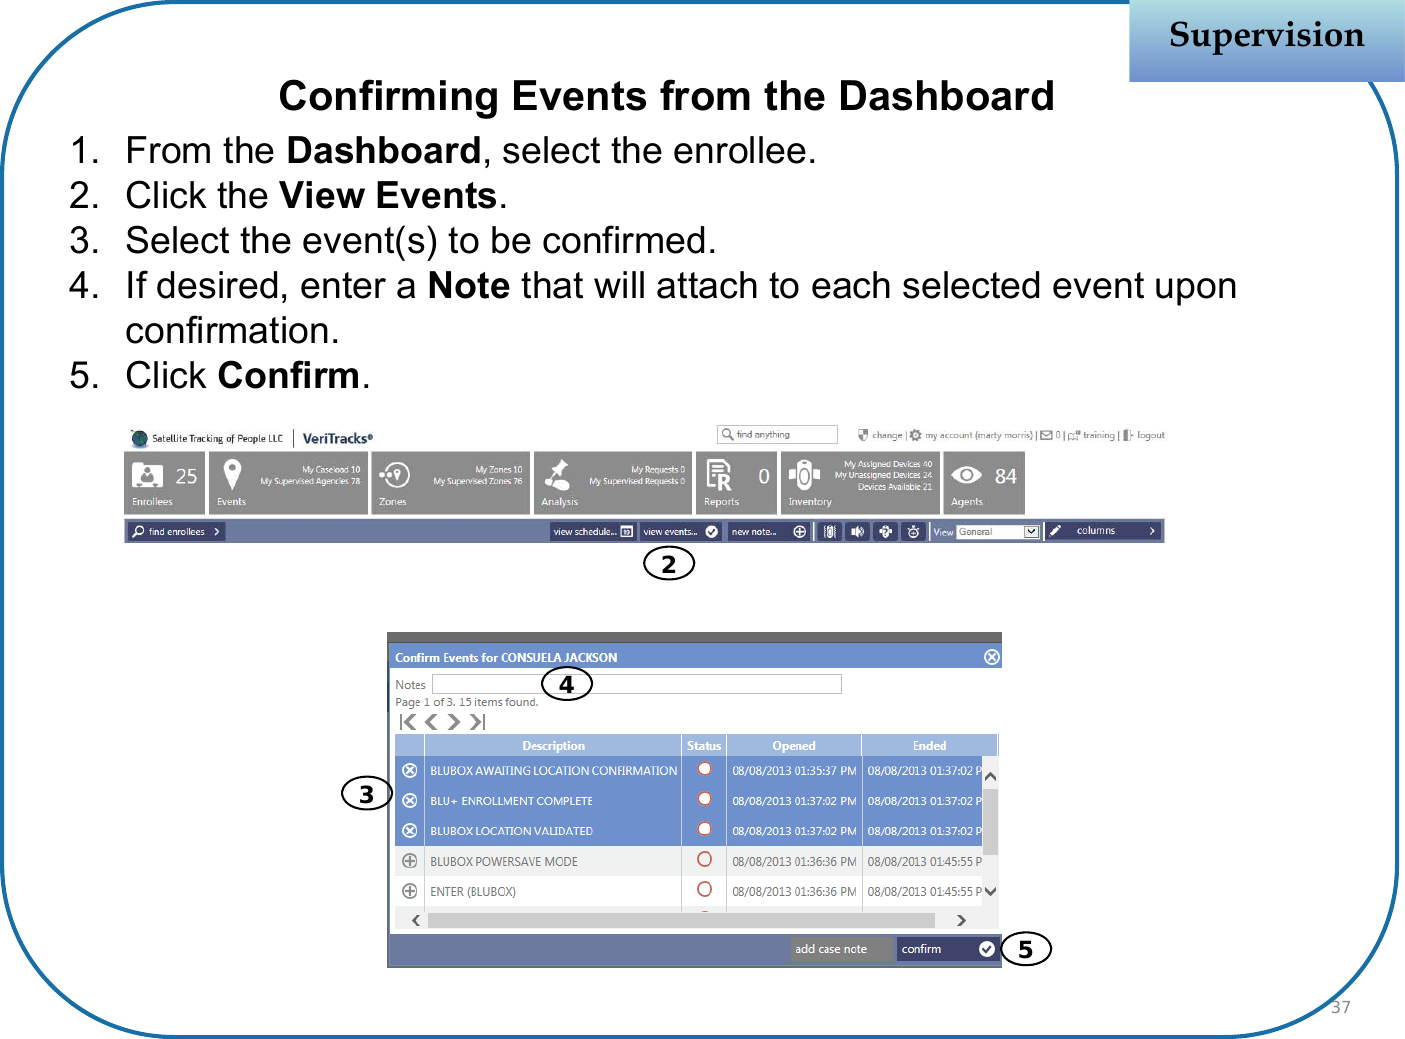 Confirming Events from the Dashboard1. From the Dashboard, select the enrollee.2. Click the View Events.3. Select the event(s) to be confirmed.4. If desired, enter a Note that will attach to each selected event upon confirmation.5. Click Confirm.SupervisionSupervision354237